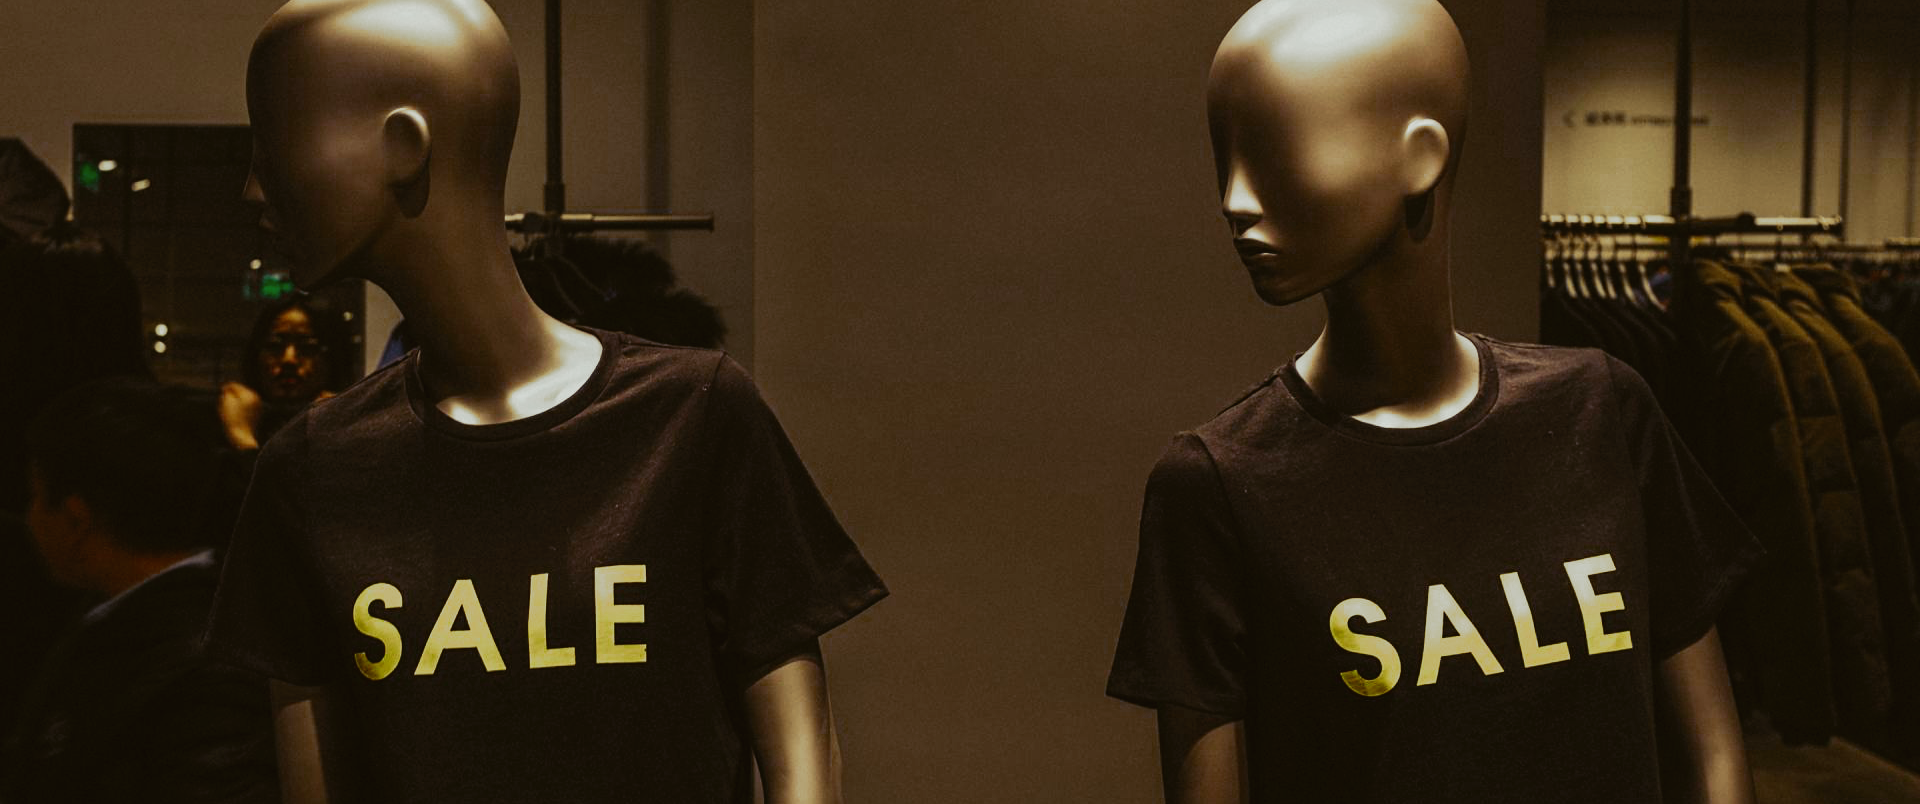 Image of two mannequins with shirts that say “sale”